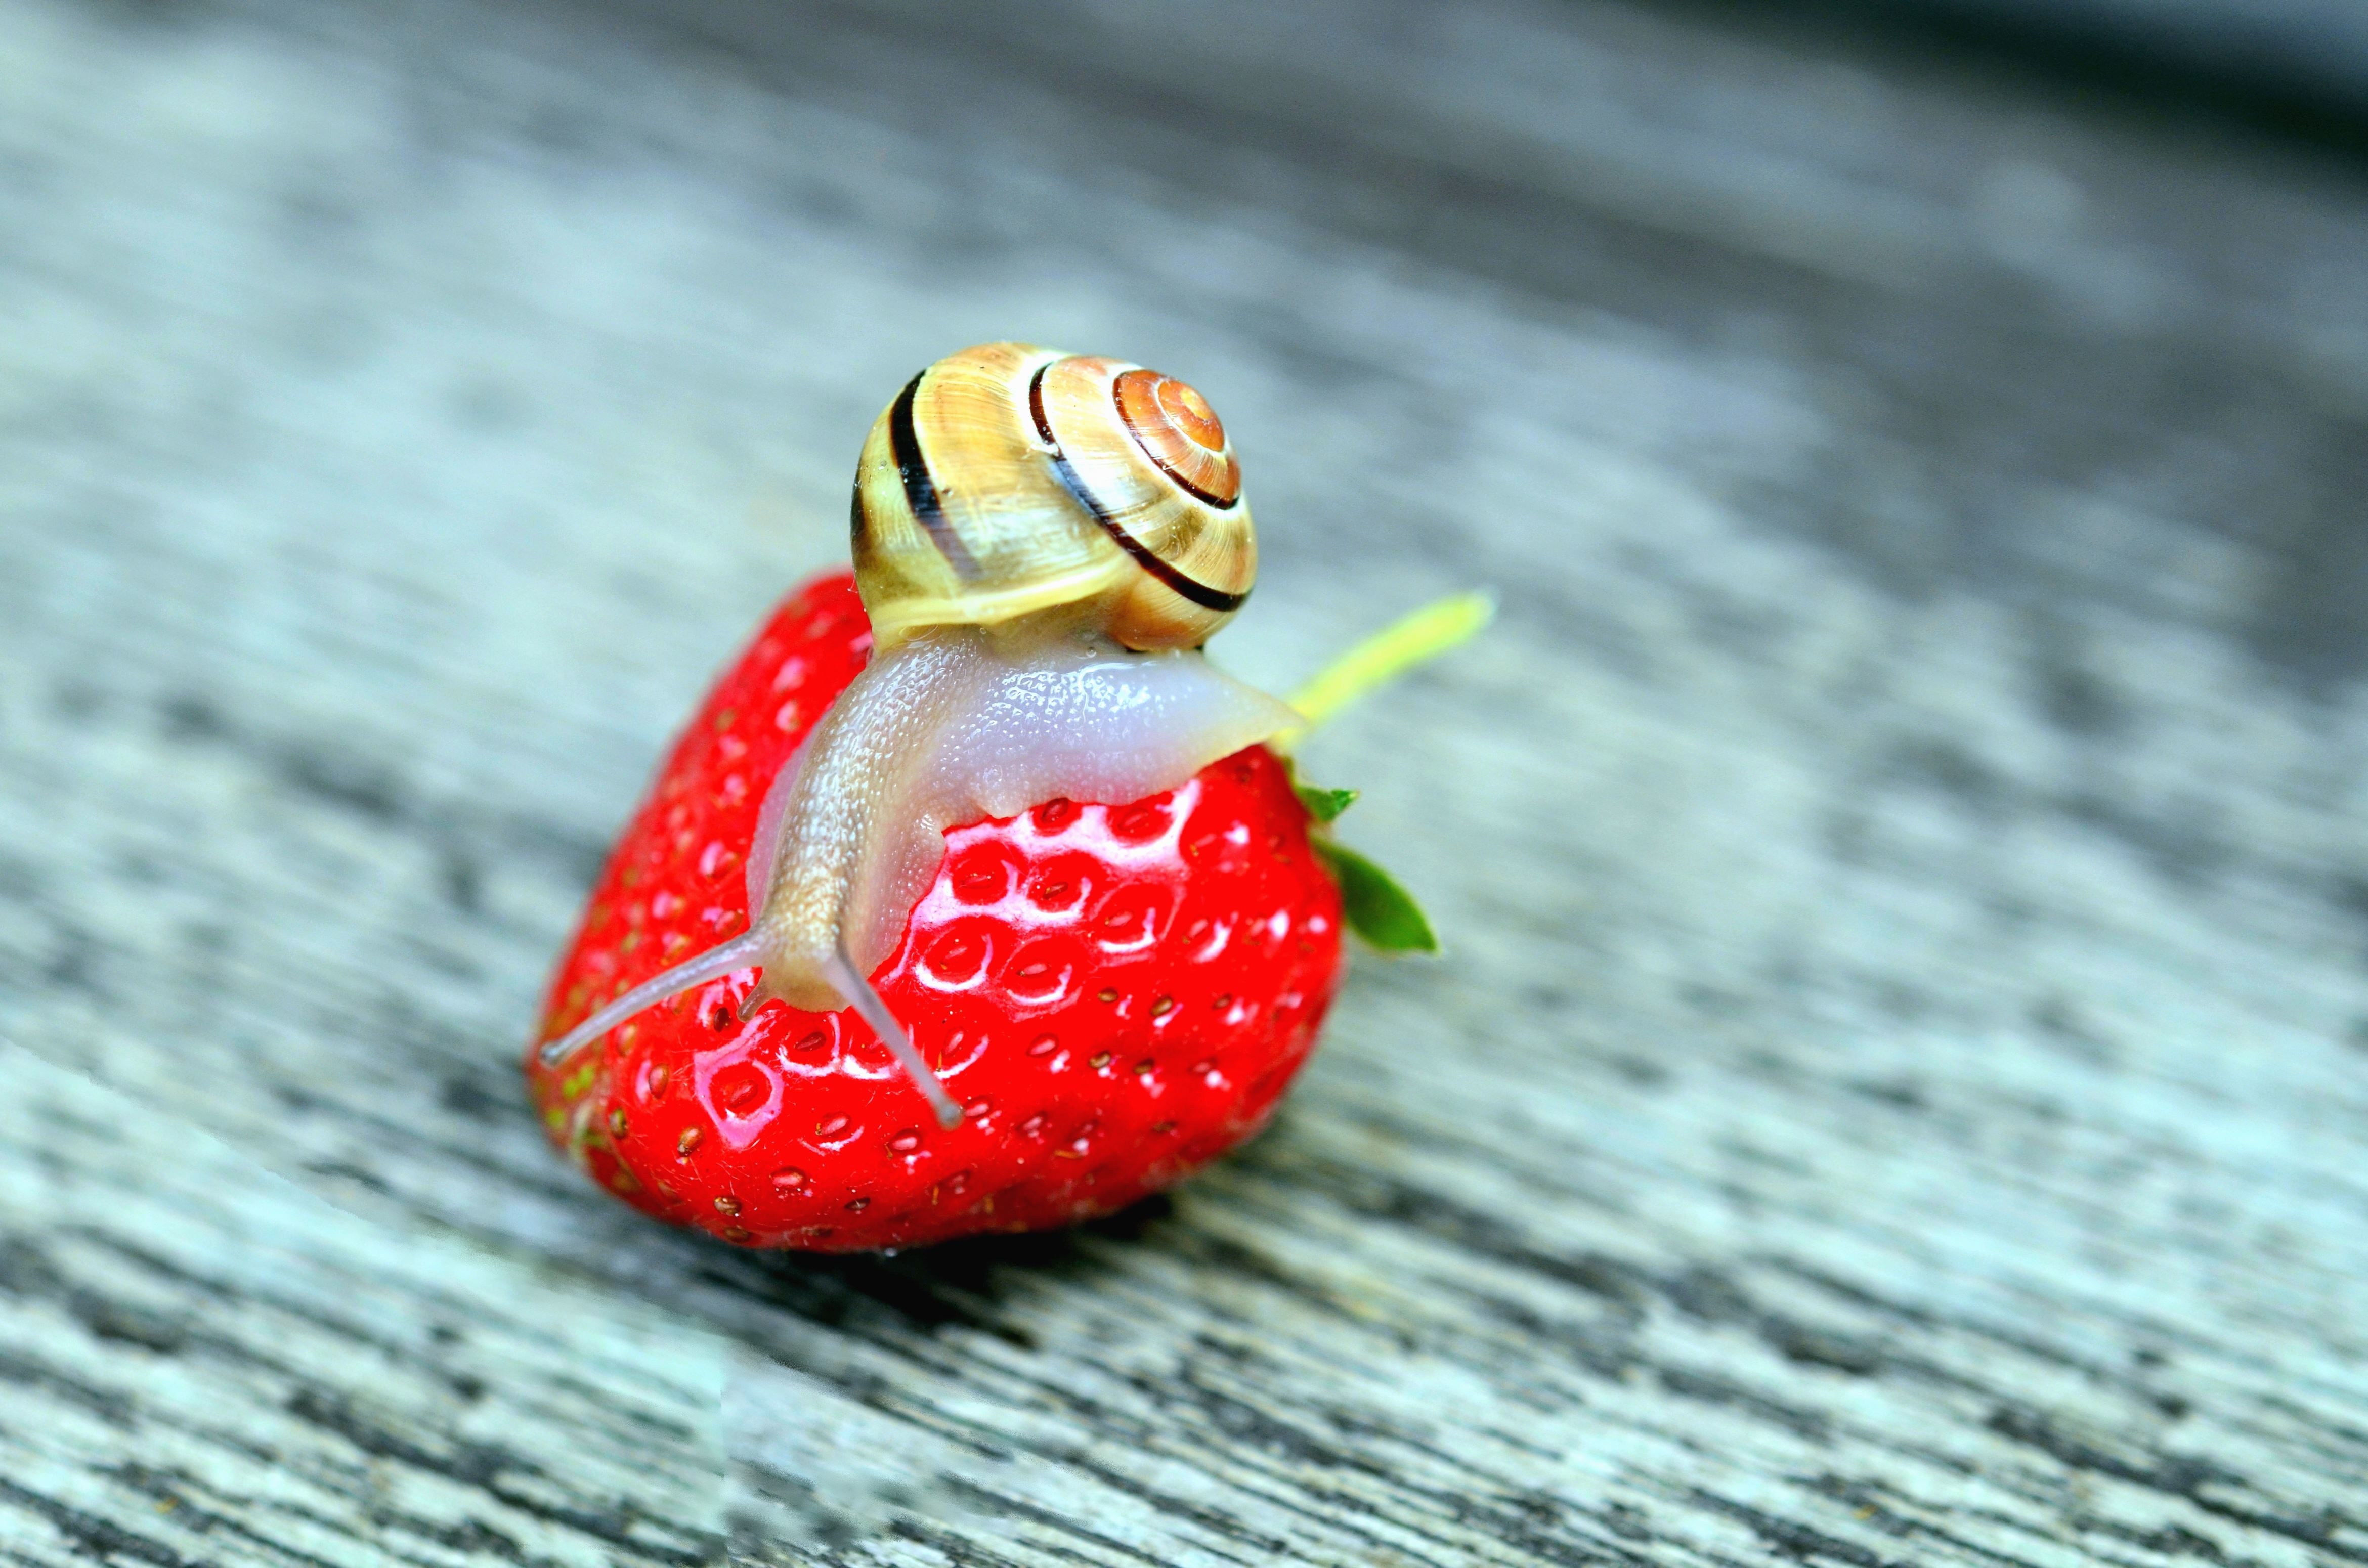 Free picture: strawberry, snail, table, fruits, animals, invertebrates